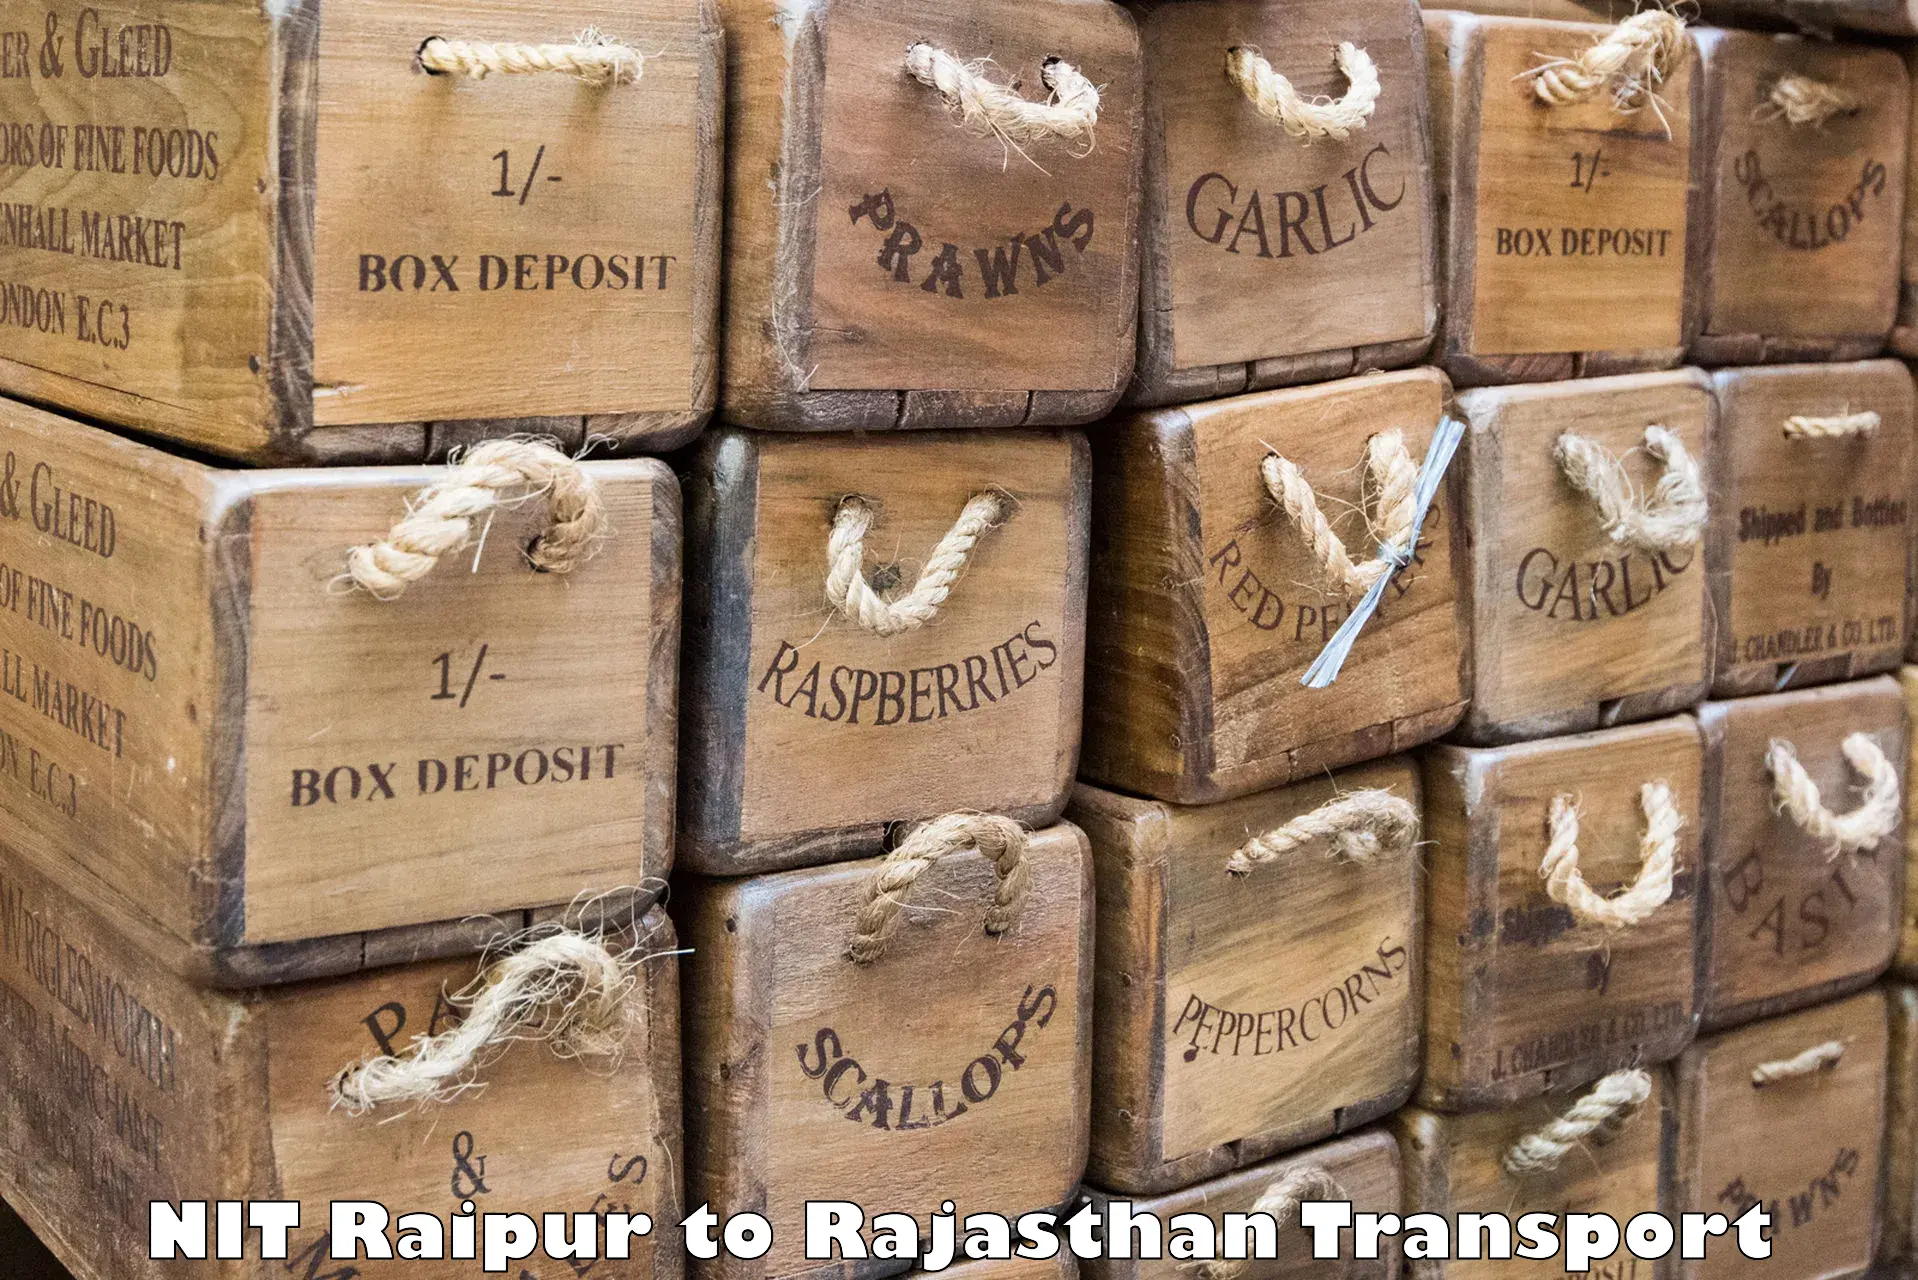 Commercial transport service NIT Raipur to Deenwa